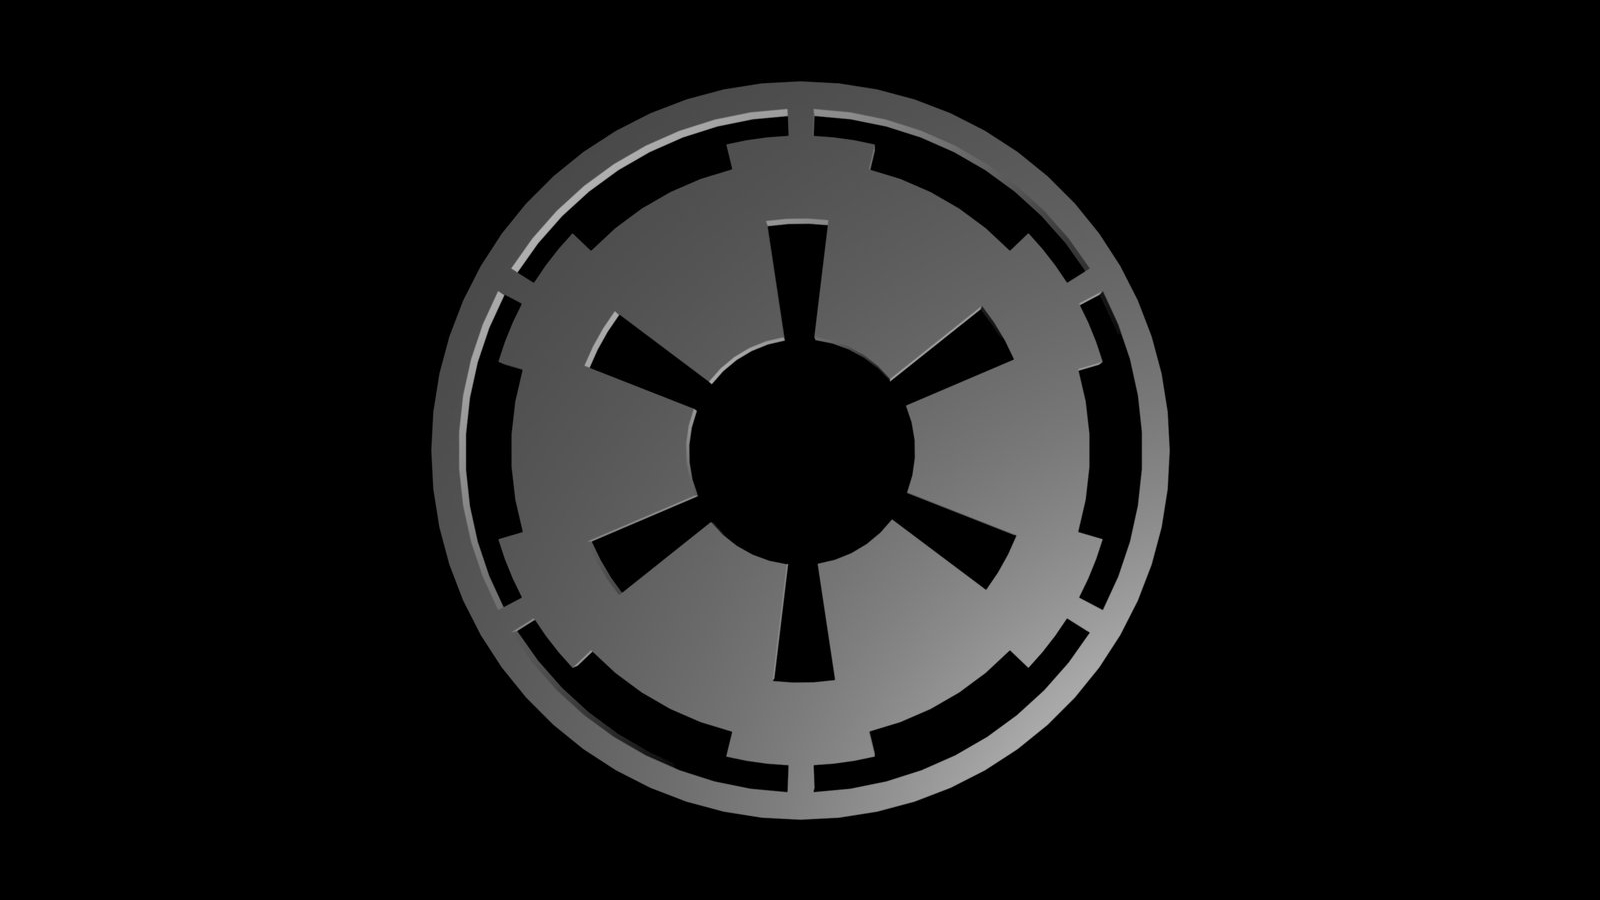 Imperial Logo Wallpapers